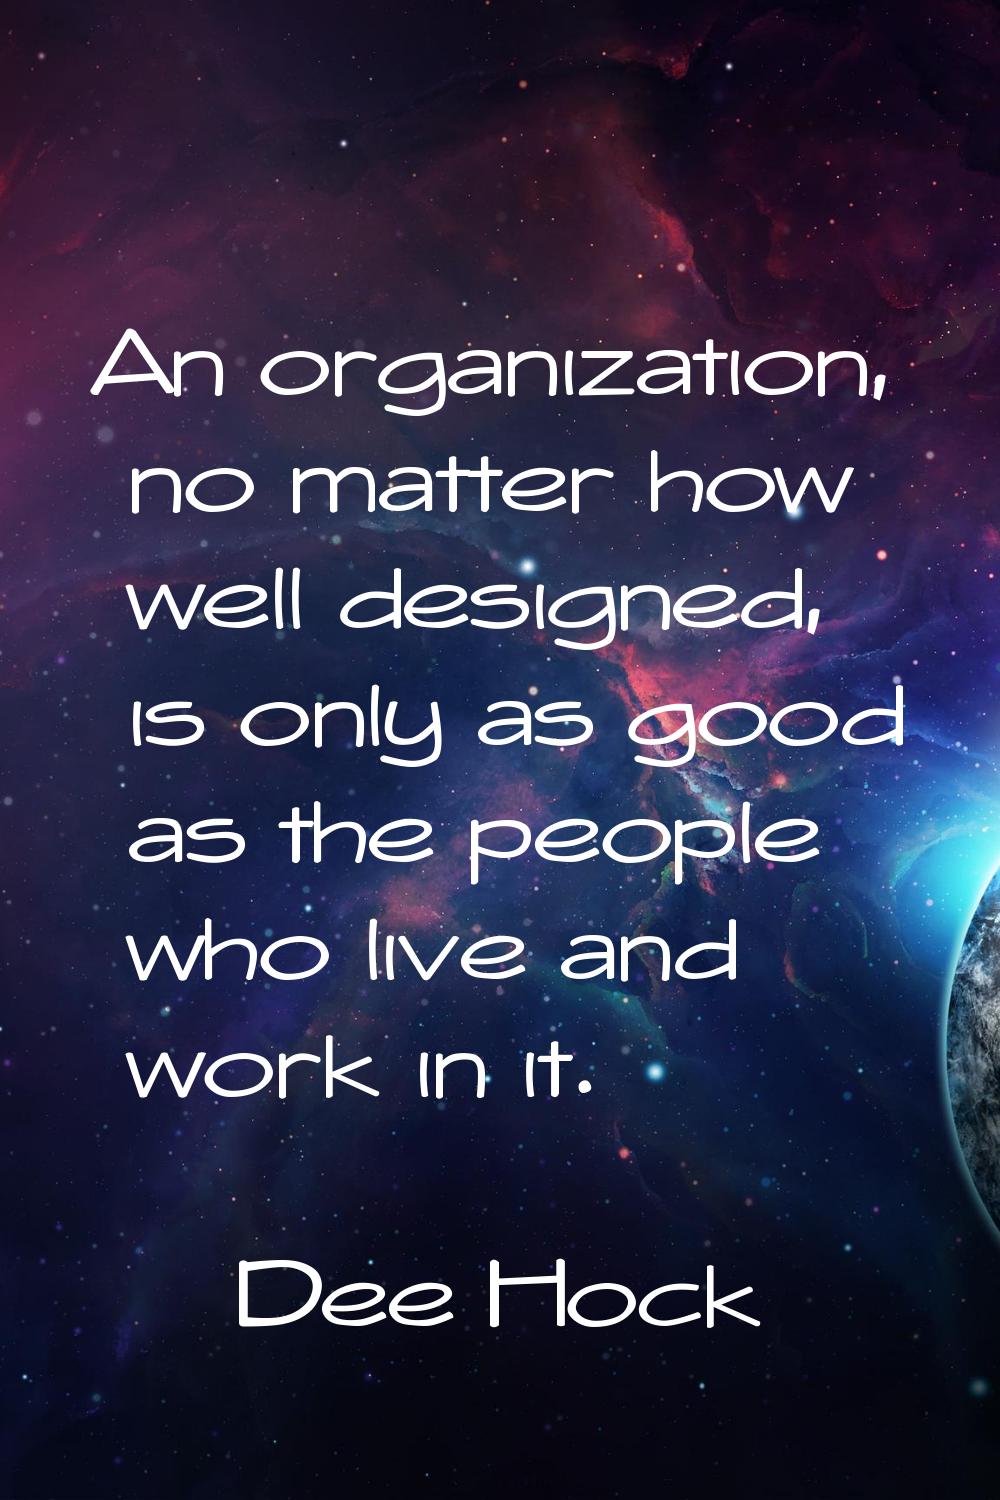 An organization, no matter how well designed, is only as good as the people who live and work in it